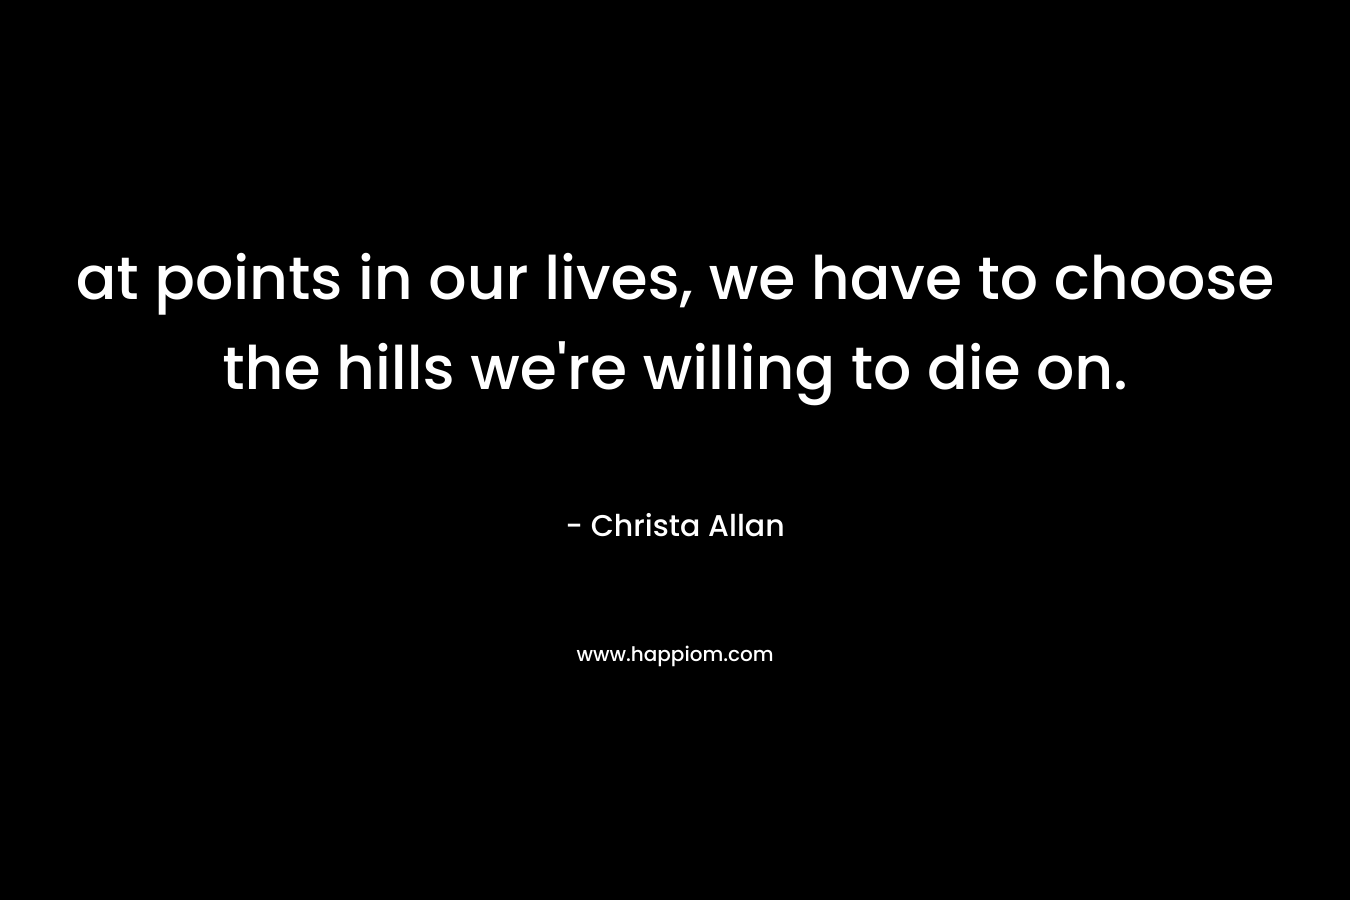 at points in our lives, we have to choose the hills we’re willing to die on. – Christa Allan